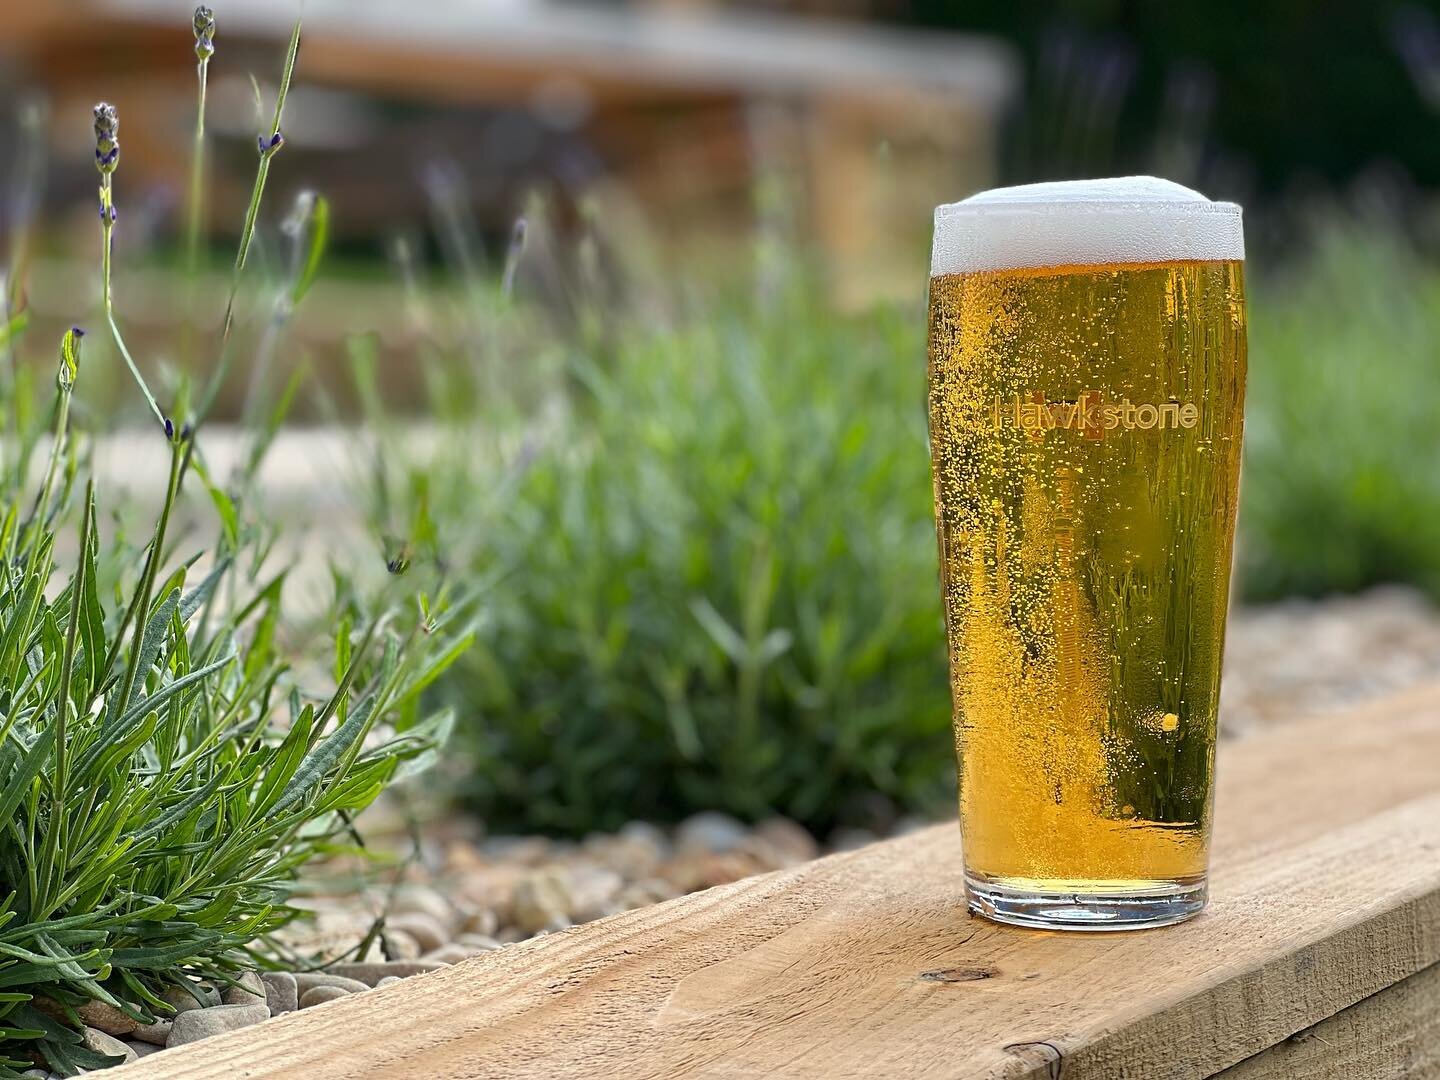 The original Hawkstone Lager. Bold, yet balanced, with a smooth body and top notes of light citrus complemented by a subtle, crisp bitterness and malty backbone. Setting the standard for a British Premium Lager. On draught now. 
.
.
.
.
.
.
#food #be